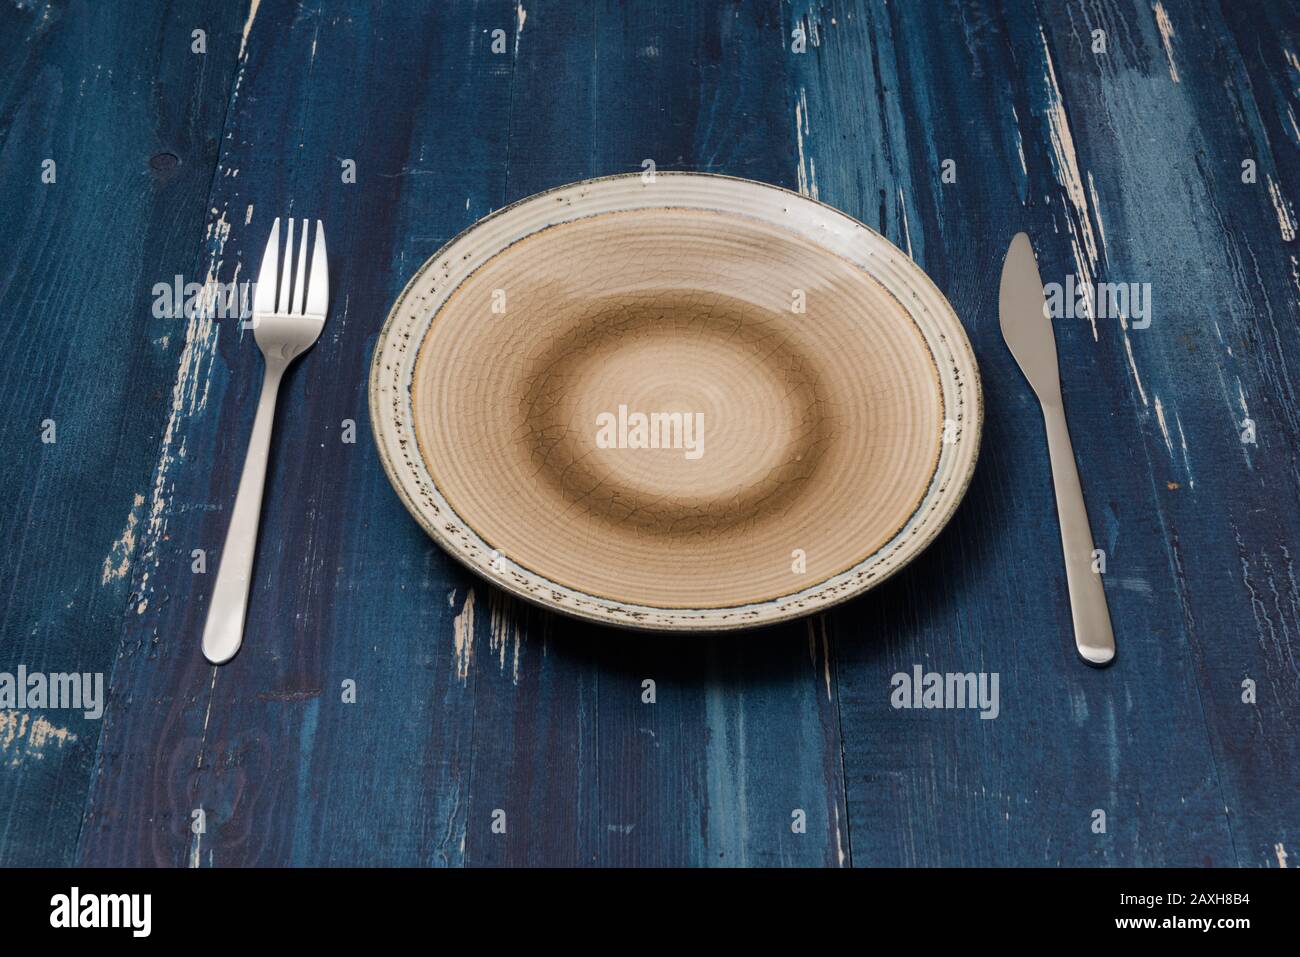 Round Plate with utensils on ocean blue wooden table background side view Stock Photo